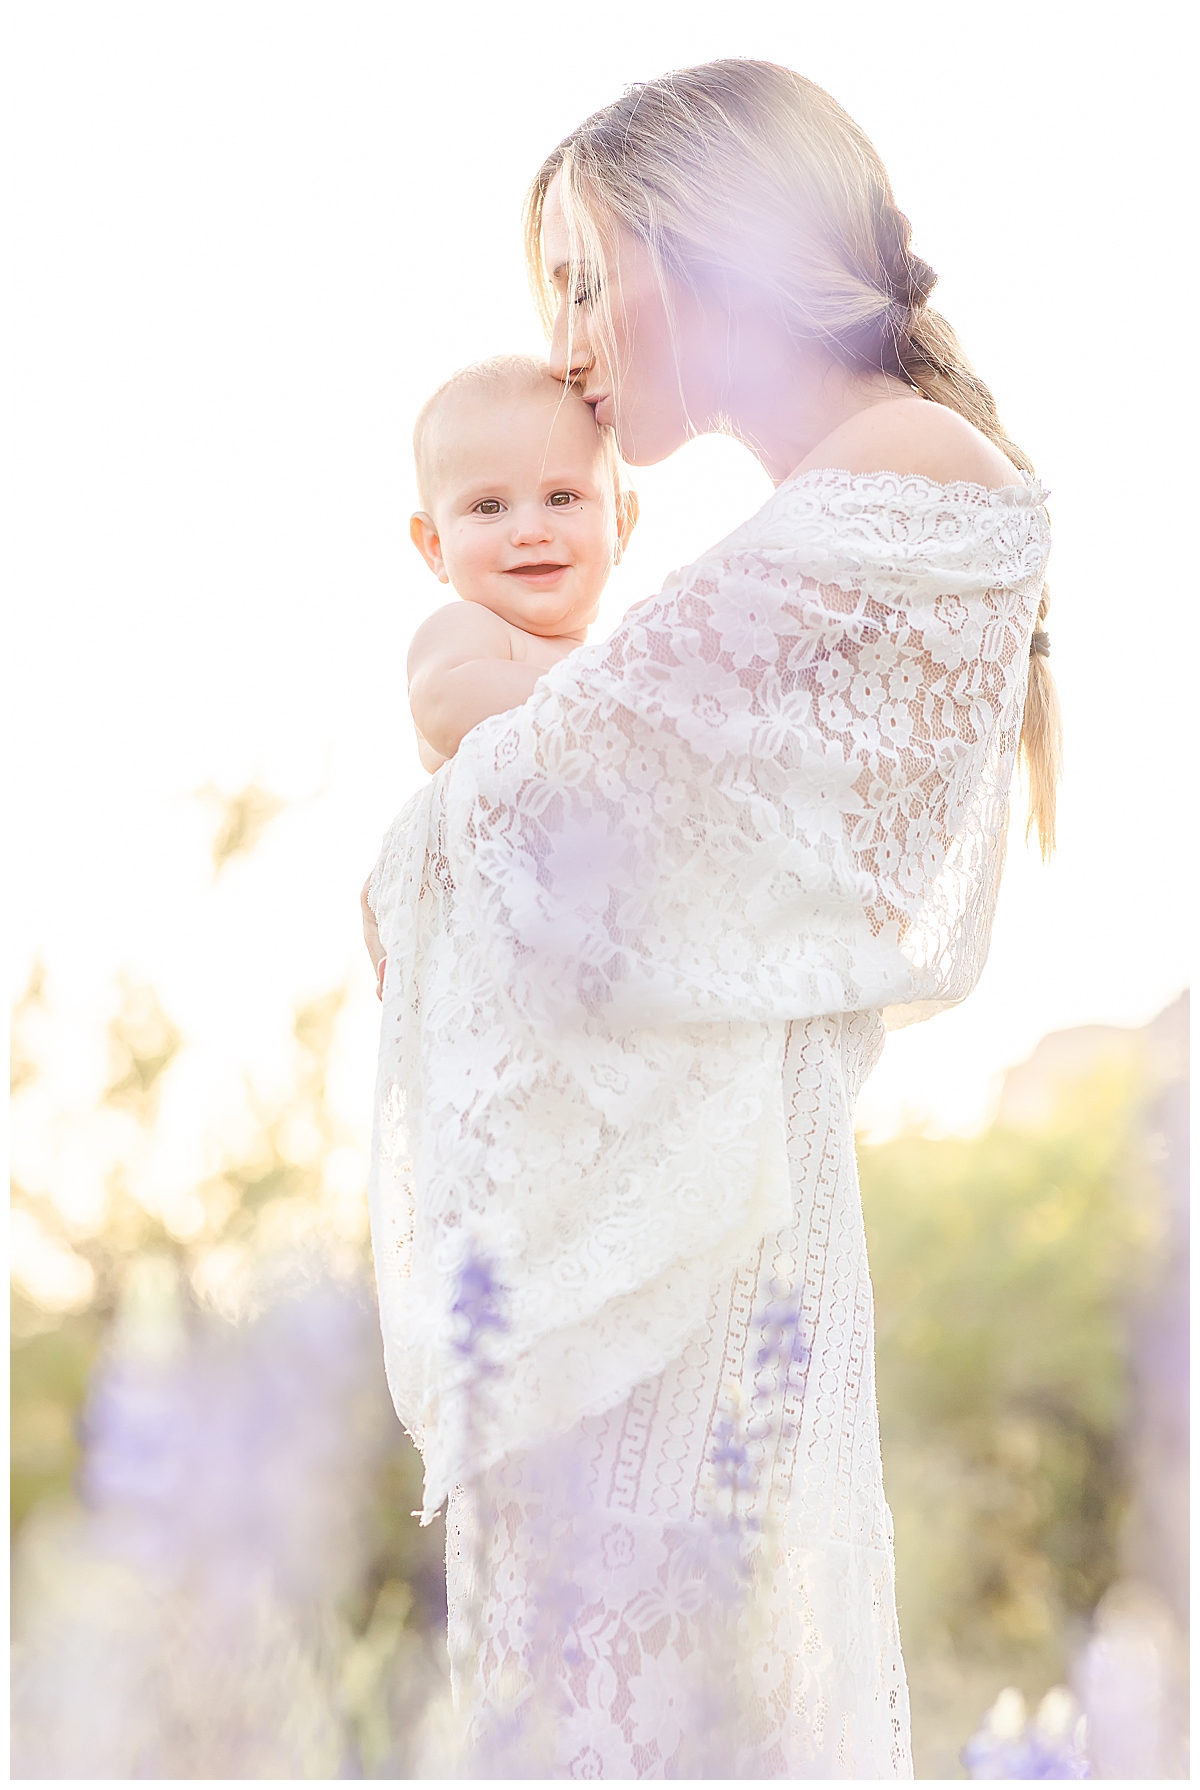 Christine Deaton Creative | Scottsdale Phoenix Arizona | Desert Photos | Newborn Pictures | What to Wear | Newborn Nursing | Newborn Photos | Nursing Photos | Newborn Photoshoot Outfit Inspiration | How to Dress | Color Scheme | Neutral Colors | White Cream Beige | Newborn Photography | Nursing Photography | Newborn Portraits | Motherhood Photography | Lifestyle Posing | Motherhood Portraits | Nursing Mother | Postpartum Dress | Postpartum What to Wear | Lace Dress | Widlfowers | Desert Wildflowers | Wildflower Photography 